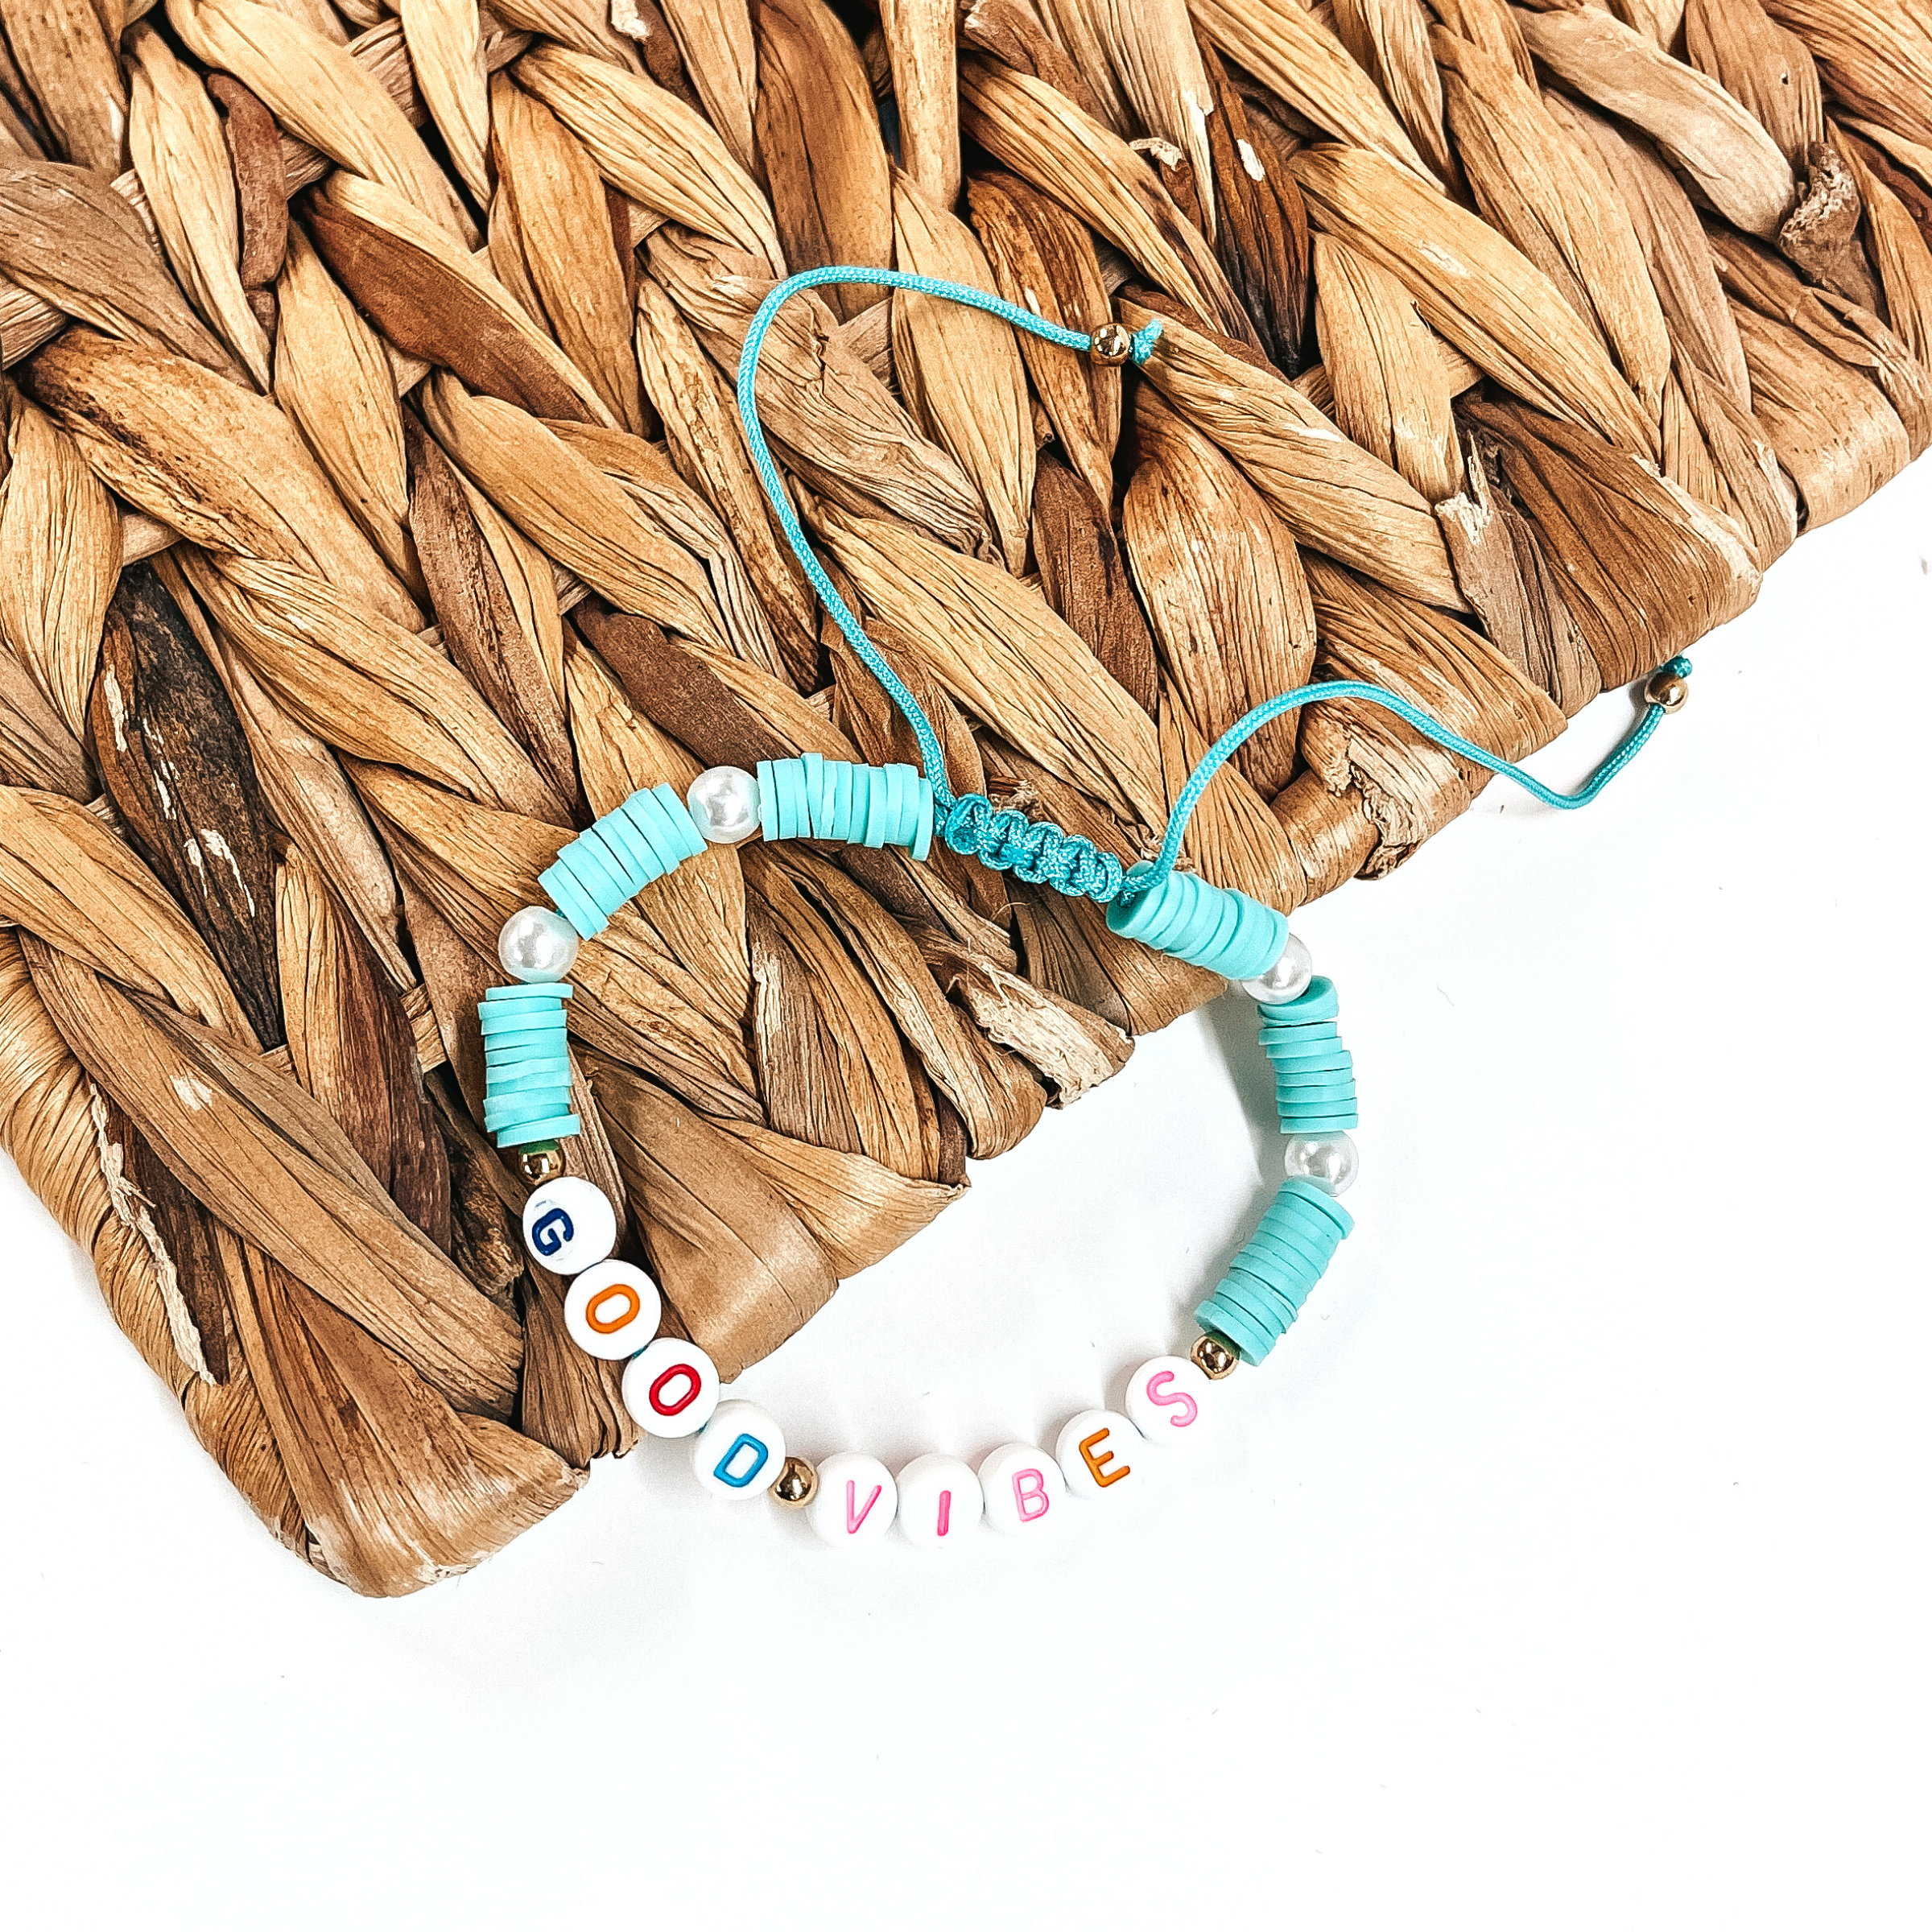 This is a disk beaded bracelet in turquoise that says, Good Vibes in different colors. There are pearl spacers. This bracelet is laying partly on a woven slate and on a white background.